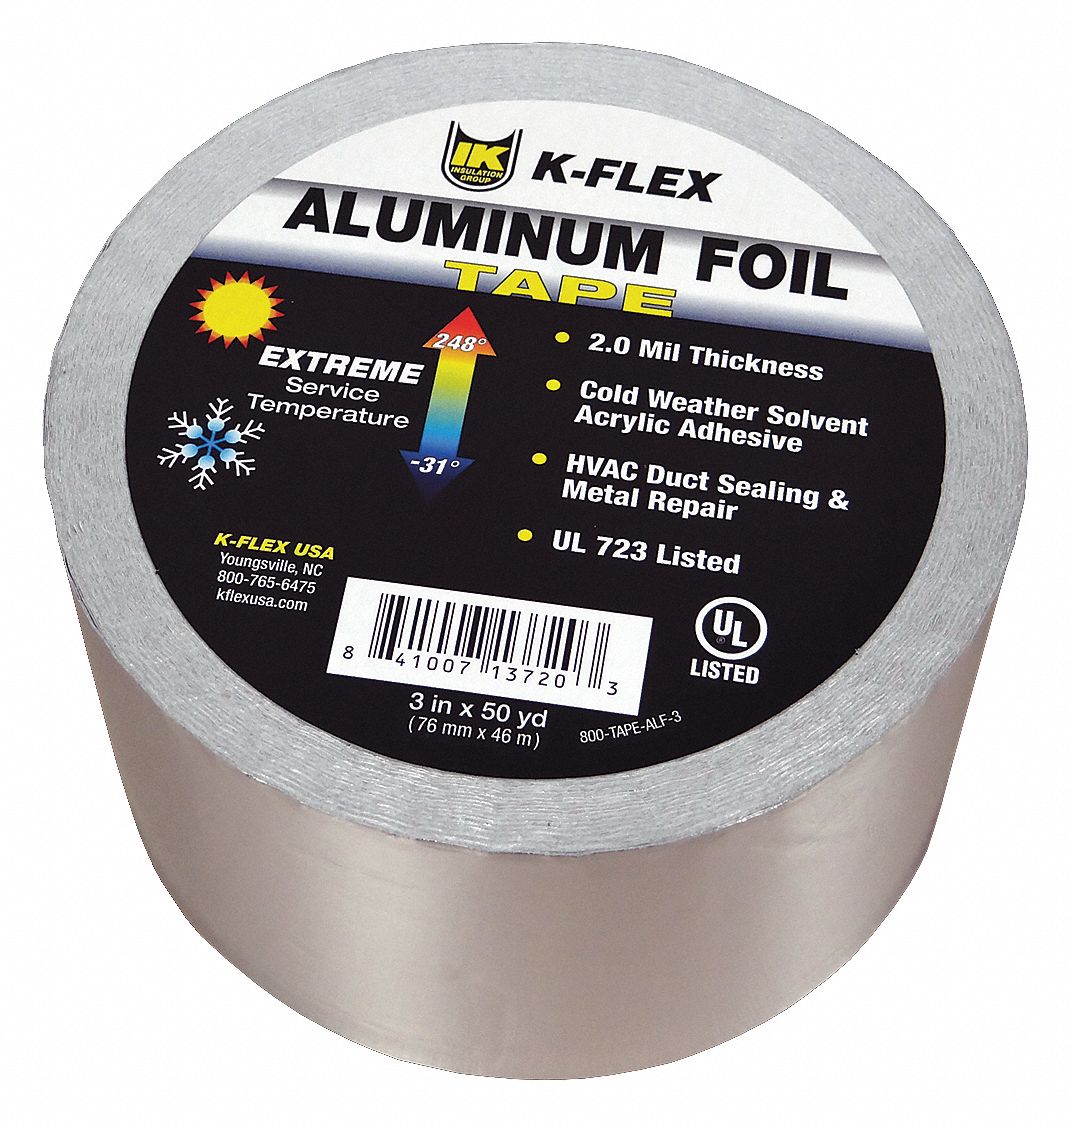 2 Rolls Aluminum Foil Tape 4" x 150' With Liner Free Shipping Malleable Foil 